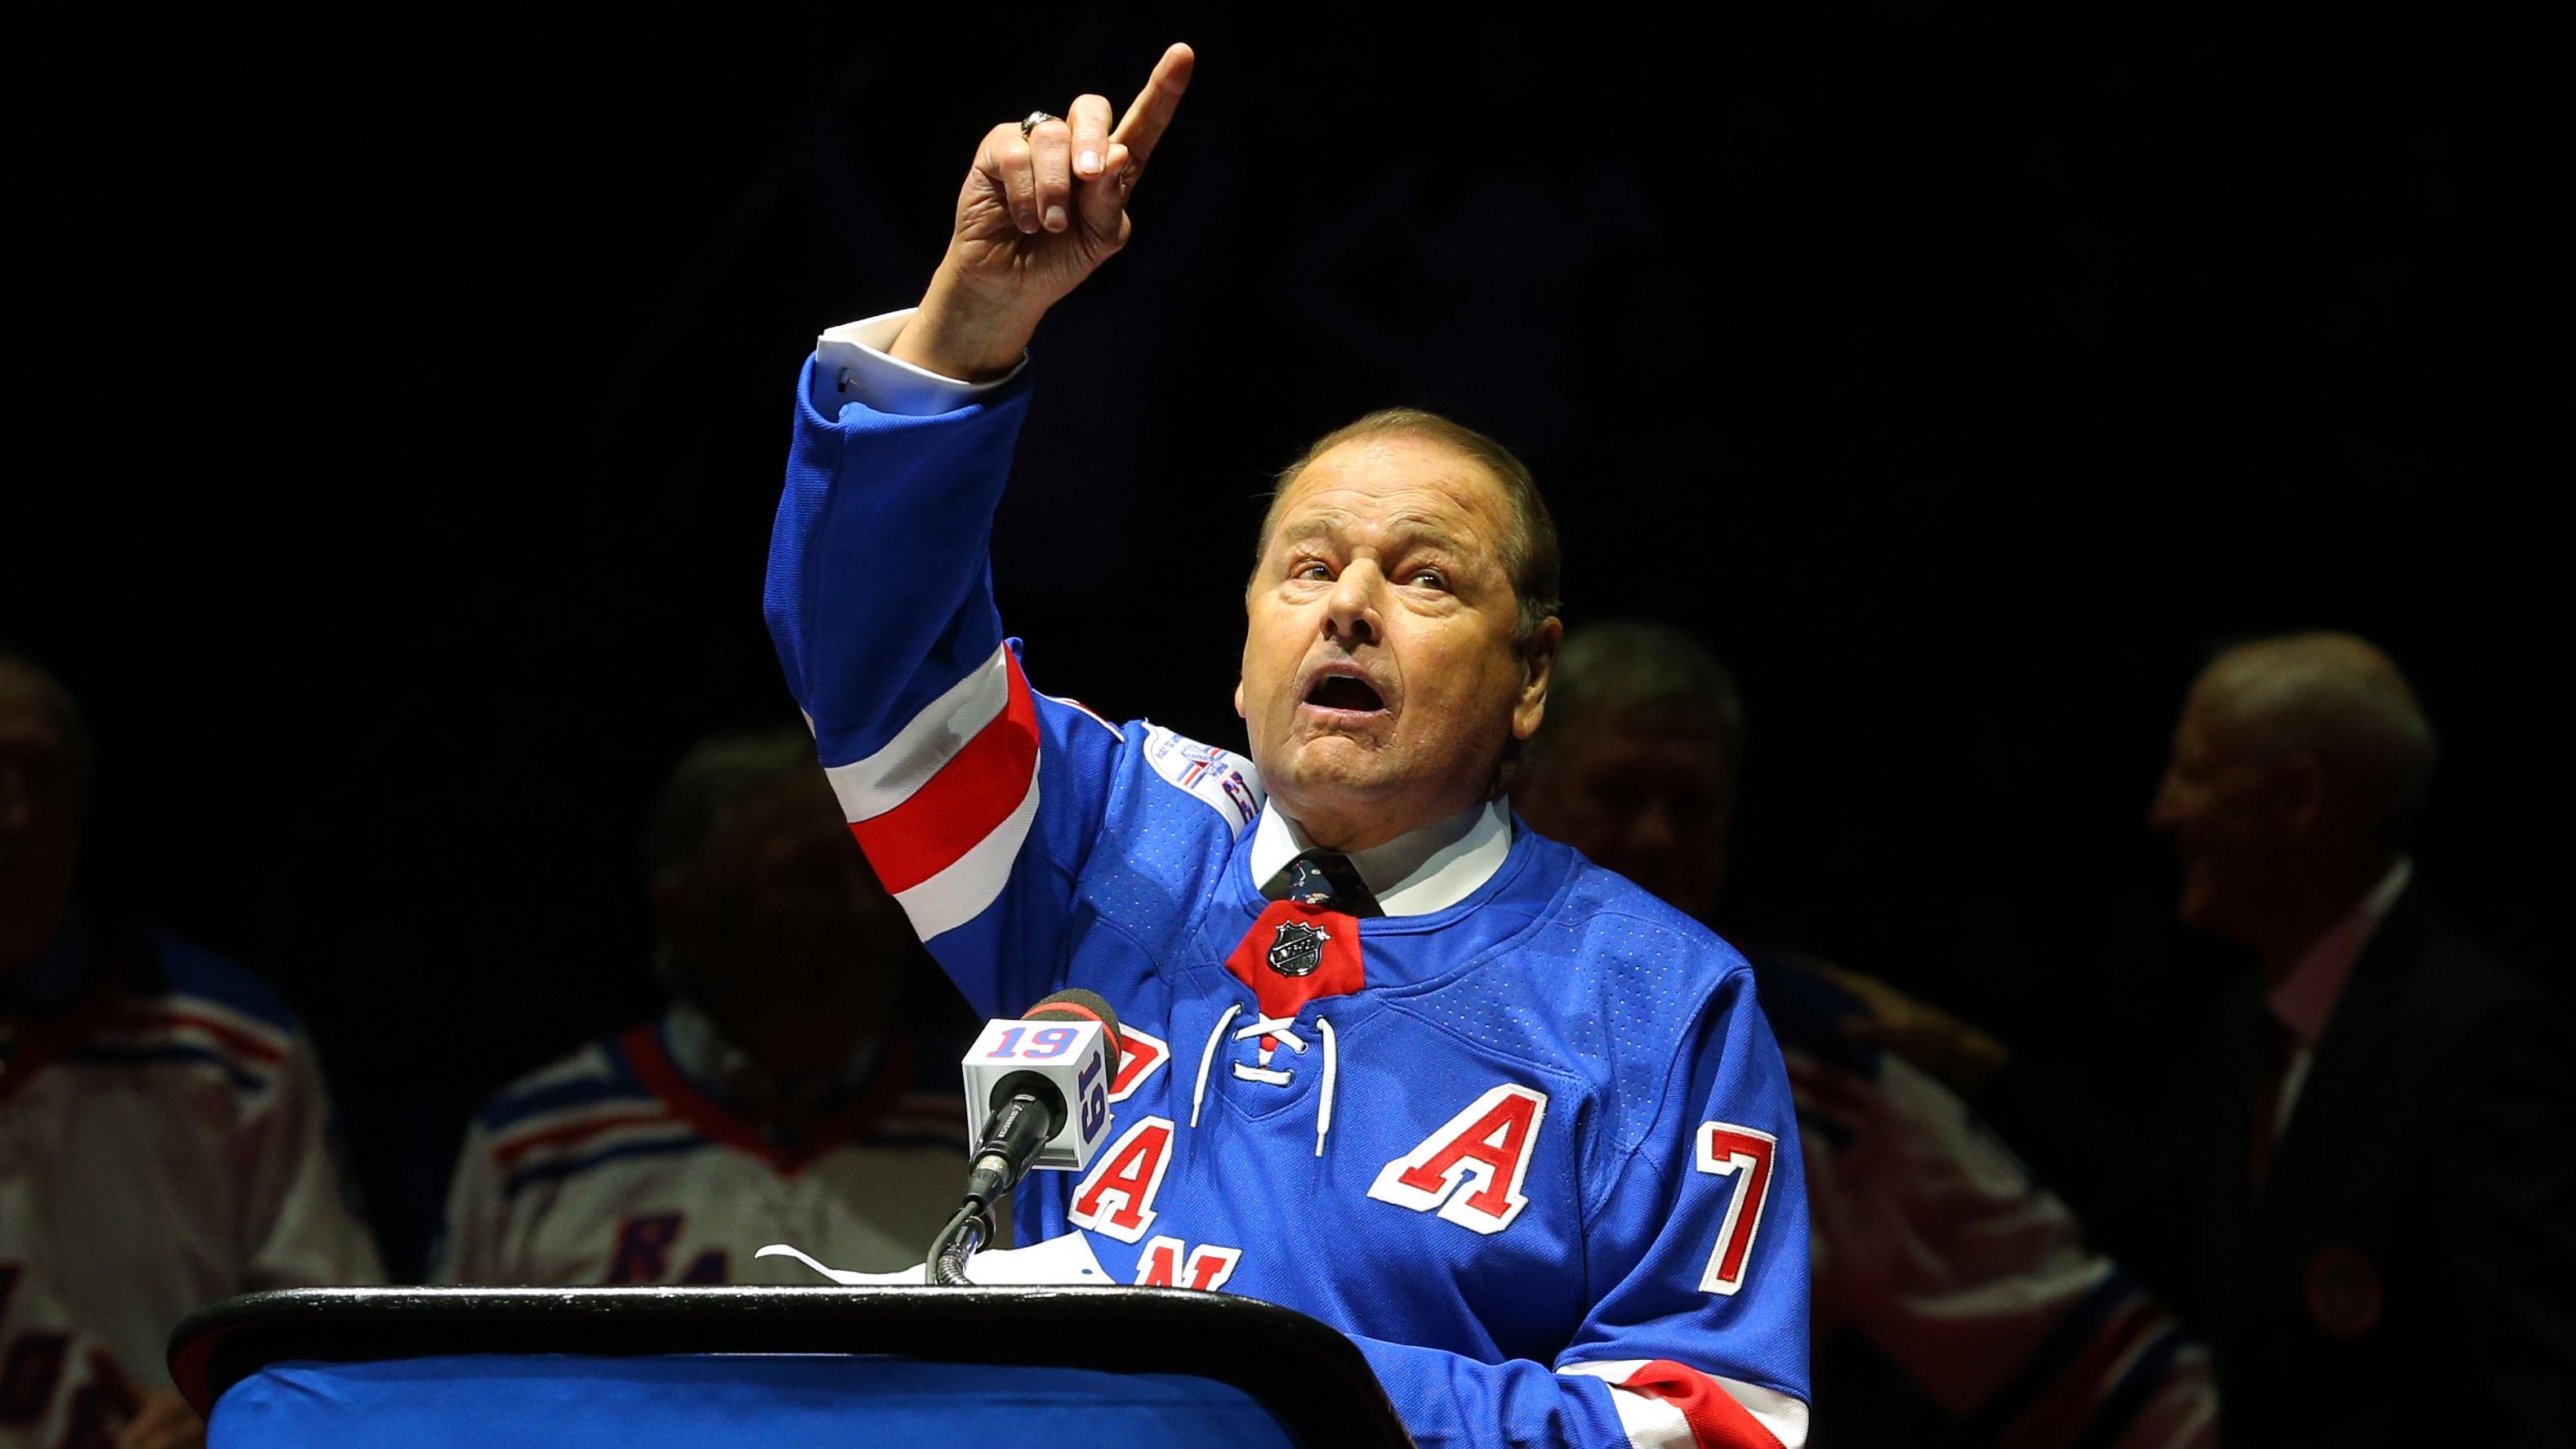 Feb 25, 2018; New York, NY, USA; Former Rangers star Rod Gilbert speaks during a banner raising ceremony for former Ranger star Jean Ratelle before a game between the New York Rangers and Detroit Red Wings at Madison Square Garden. Mandatory Credit: Brad Penner-USA TODAY Sports / Brad Penner-USA TODAY Sports